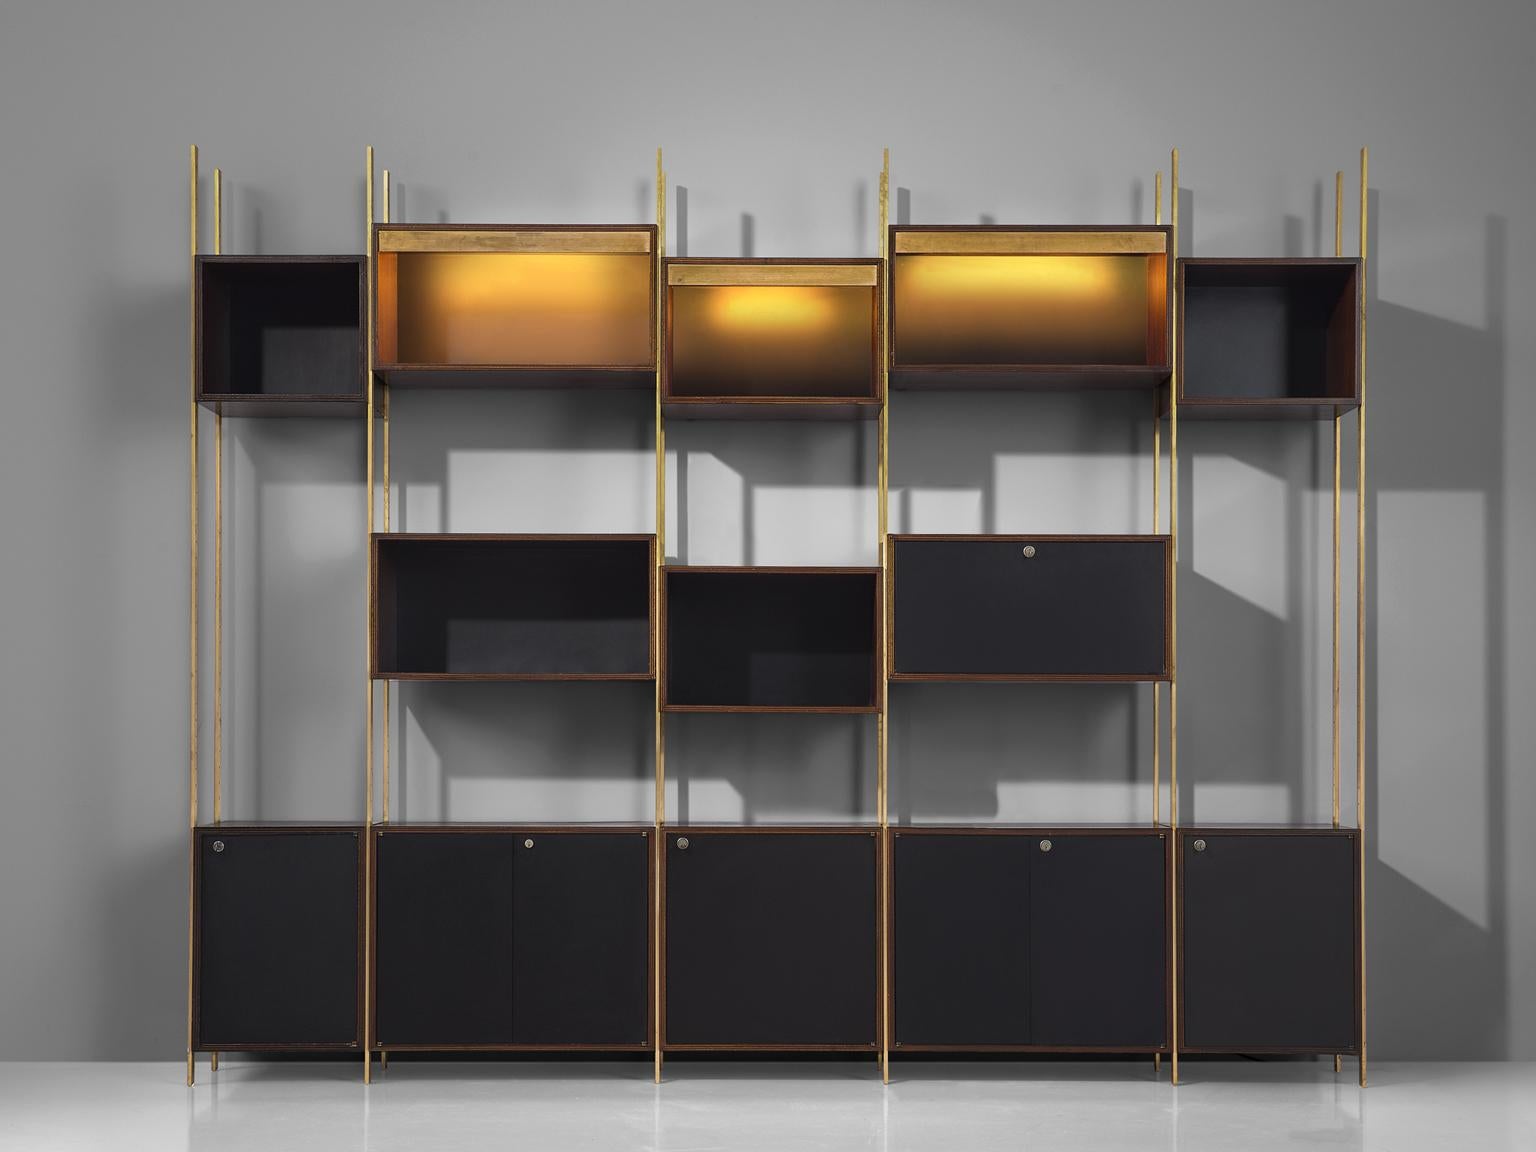 Jules Wabbes for Mobilier Universel, Bookcase, in brass and rosewood, Belgium, 1960s.
 
Rare wall unit designed with the highest precision in furniture making by master furniture-maker Jules Wabbes. This exceptional piece could be used as a library